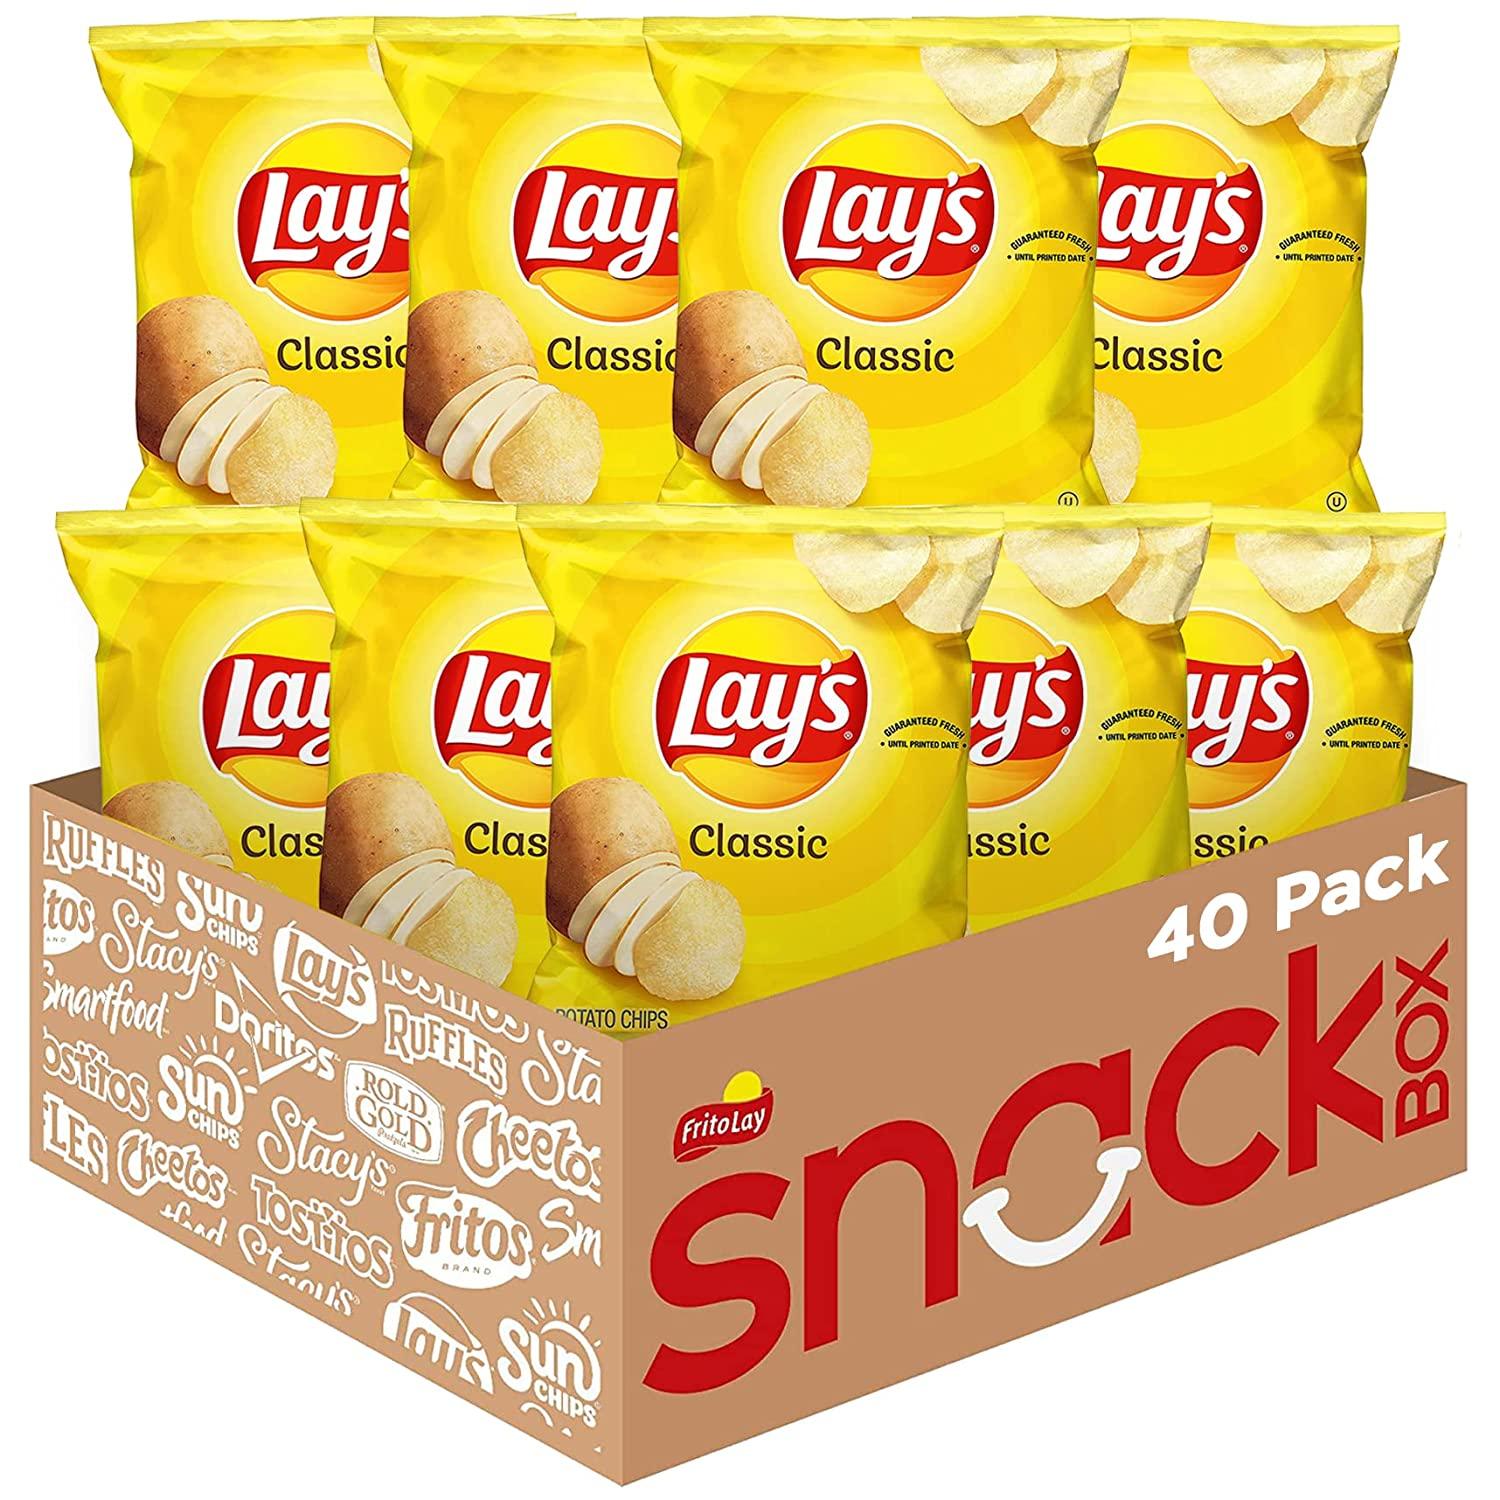 Lays Classic Potato Chips 40 Pack for $13.28 Shipped